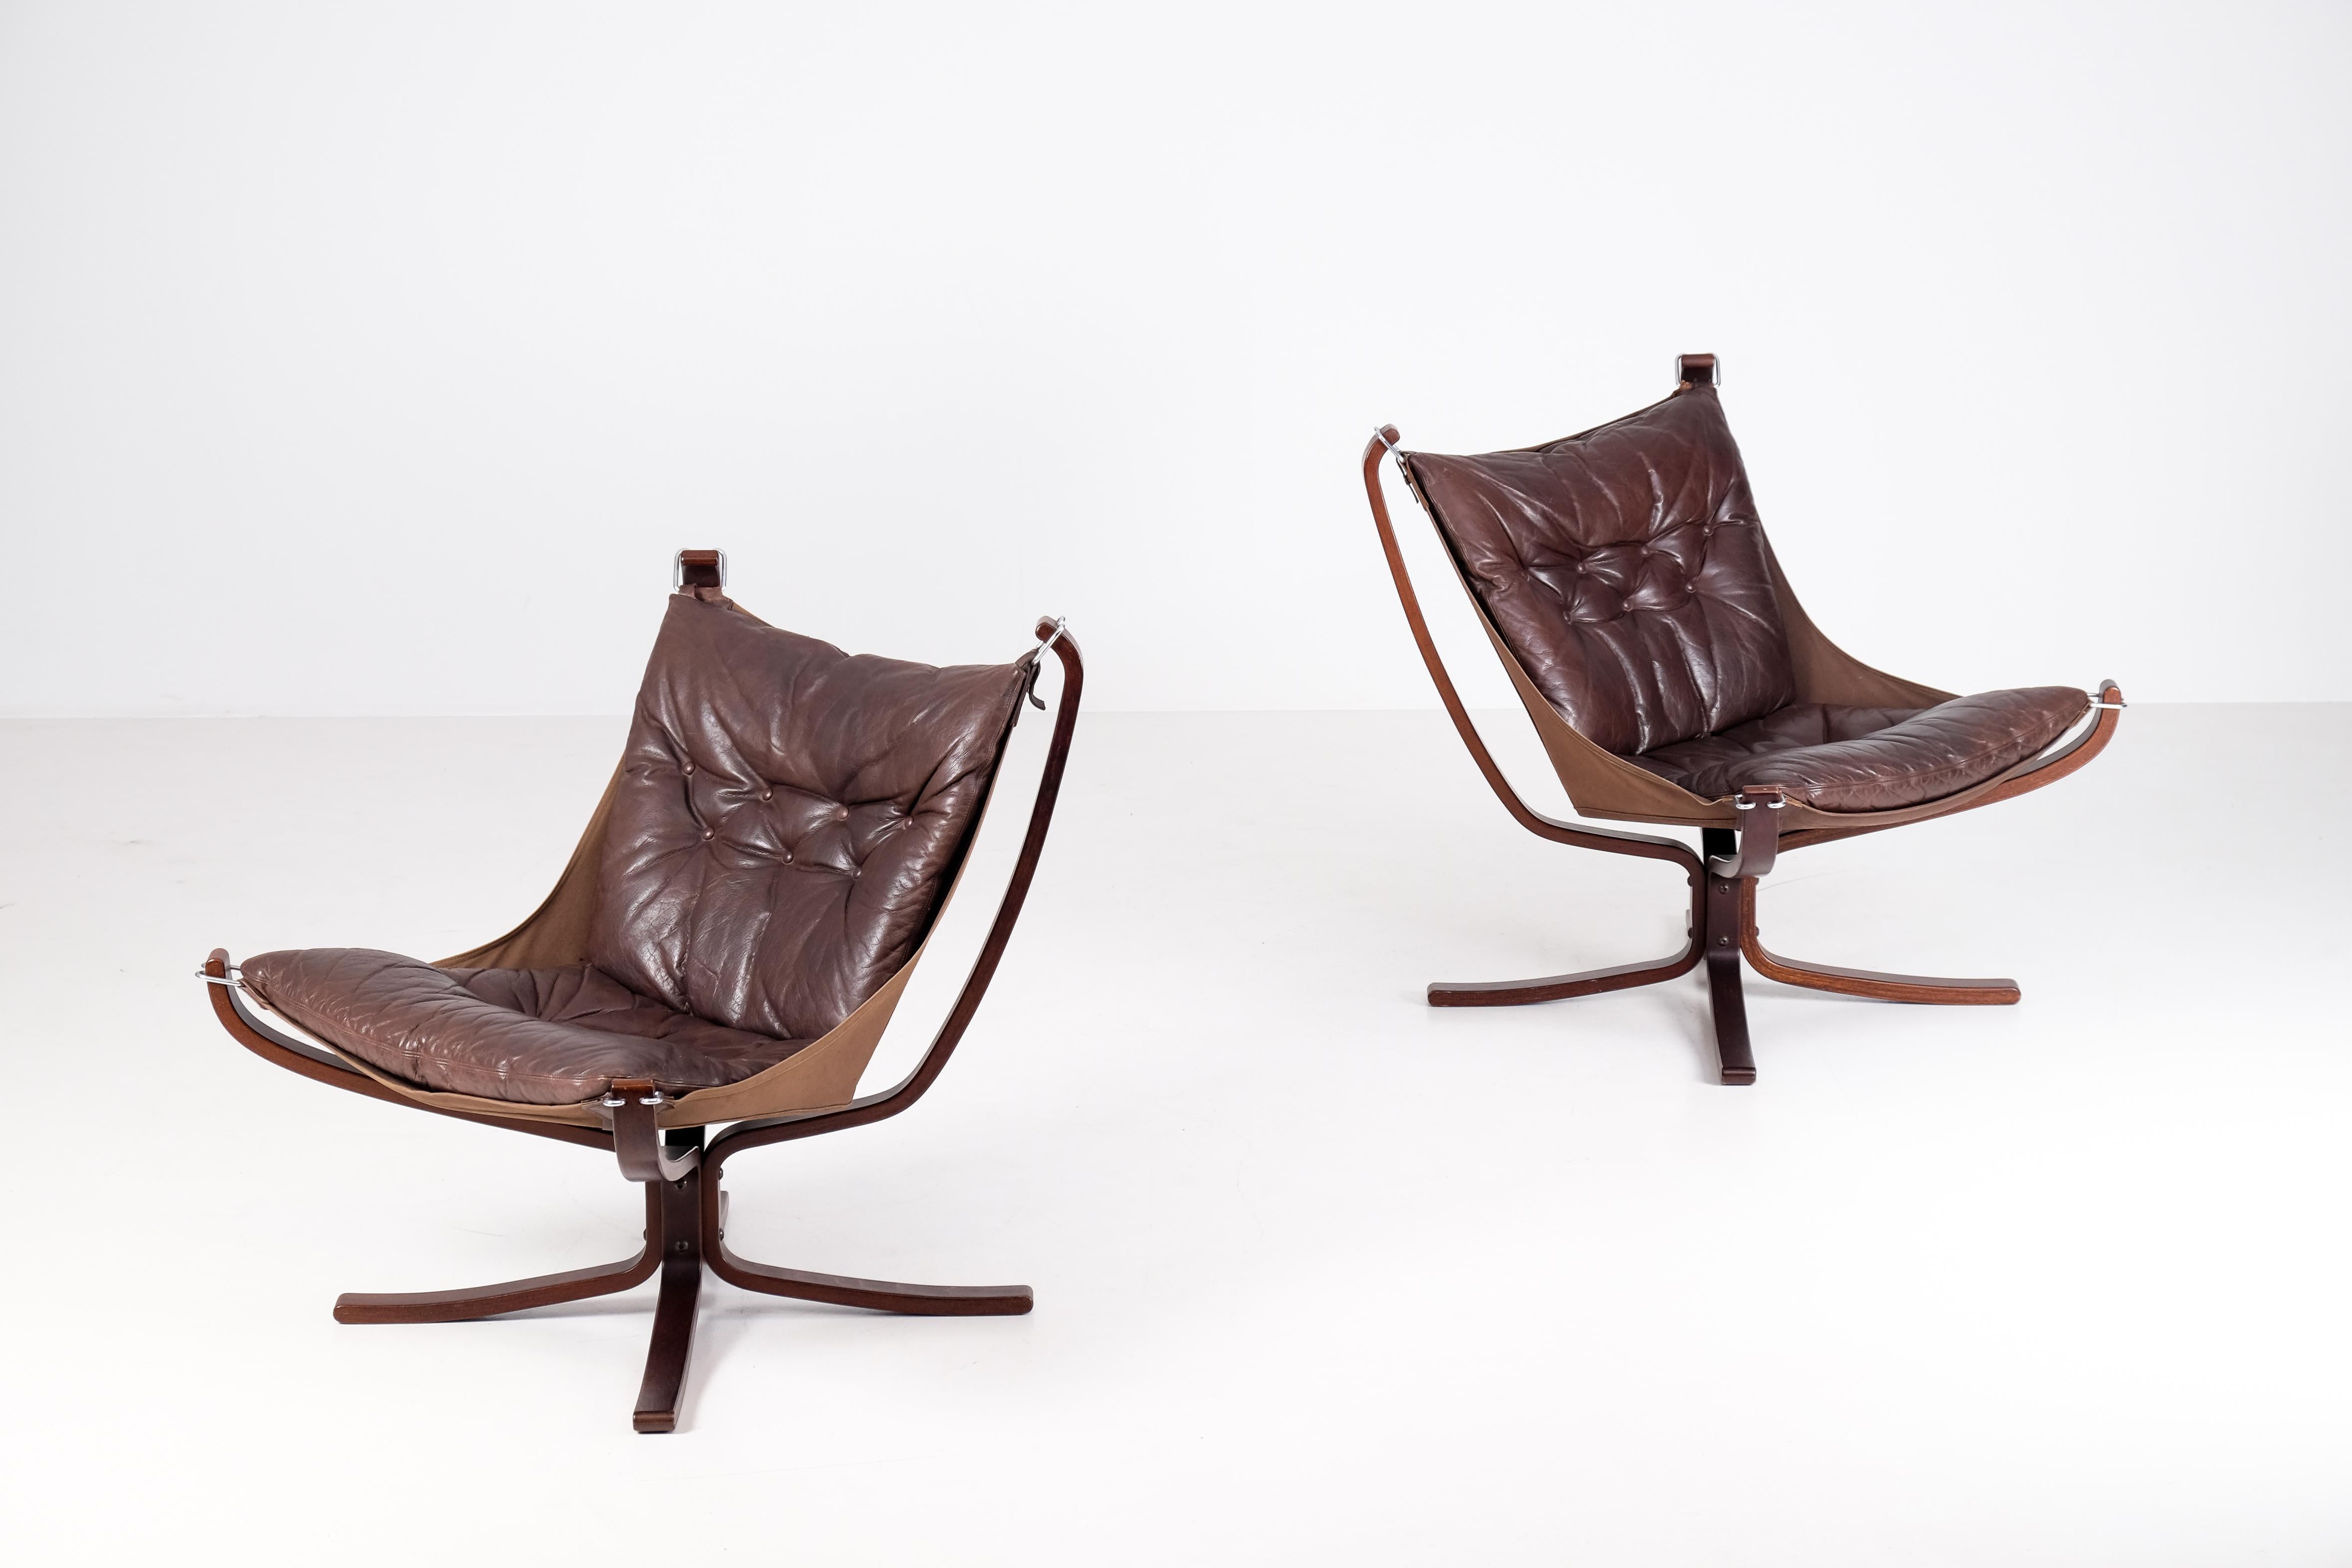 Norwegian Falcon chairs in brown leather by Sigurd Ressel, Norway, 1970s. 
Very good vintage condition with small signs of usage and patina. 
Please note: Set of 4 available. Listed price is for a pair (2 chairs).

